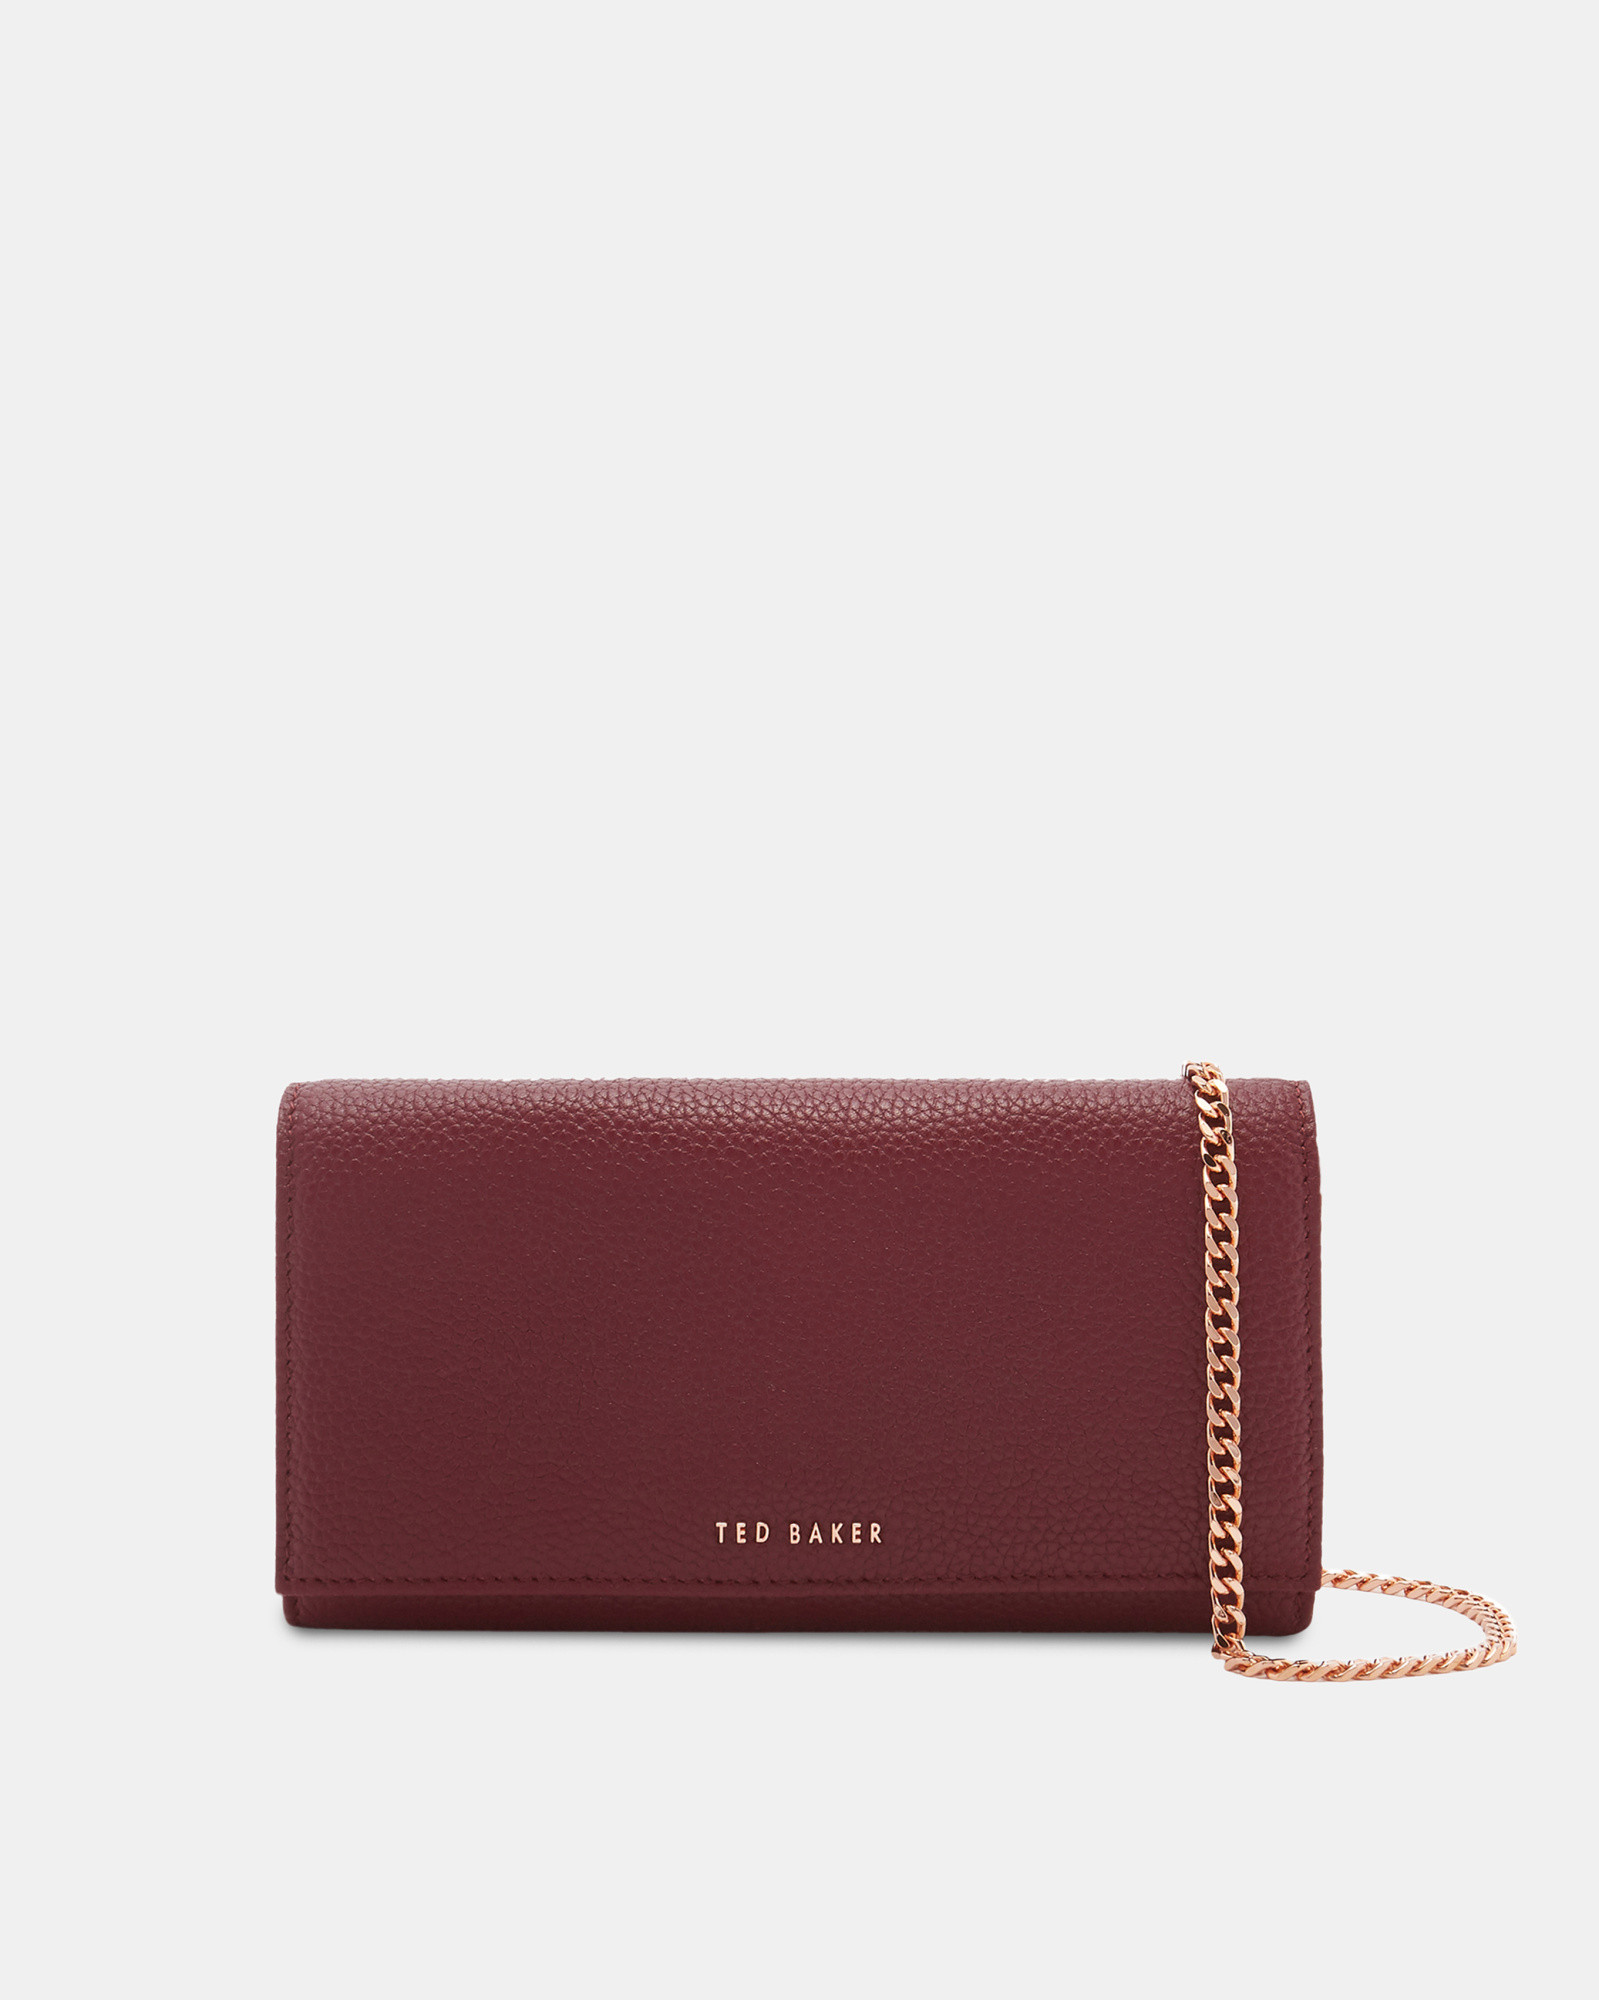 FIOLA Textured leather cross body matinee purse